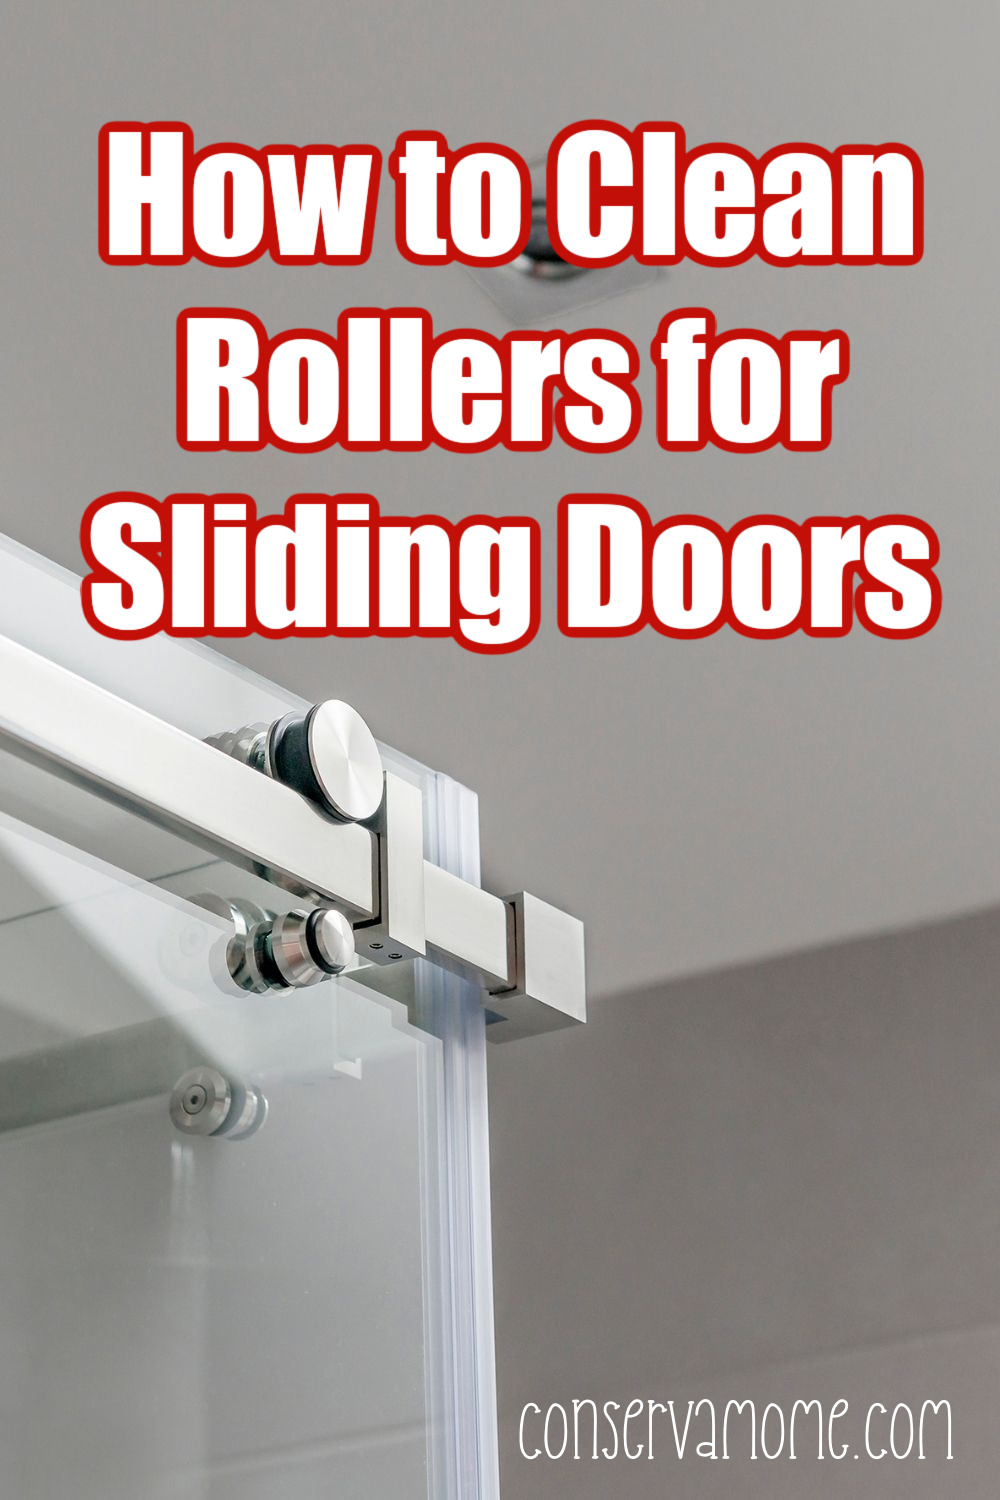 https://conservamome.com/wp-content/uploads/2015/05/How-to-Clean-Rollers-for-Sliding-Doors-2.jpg